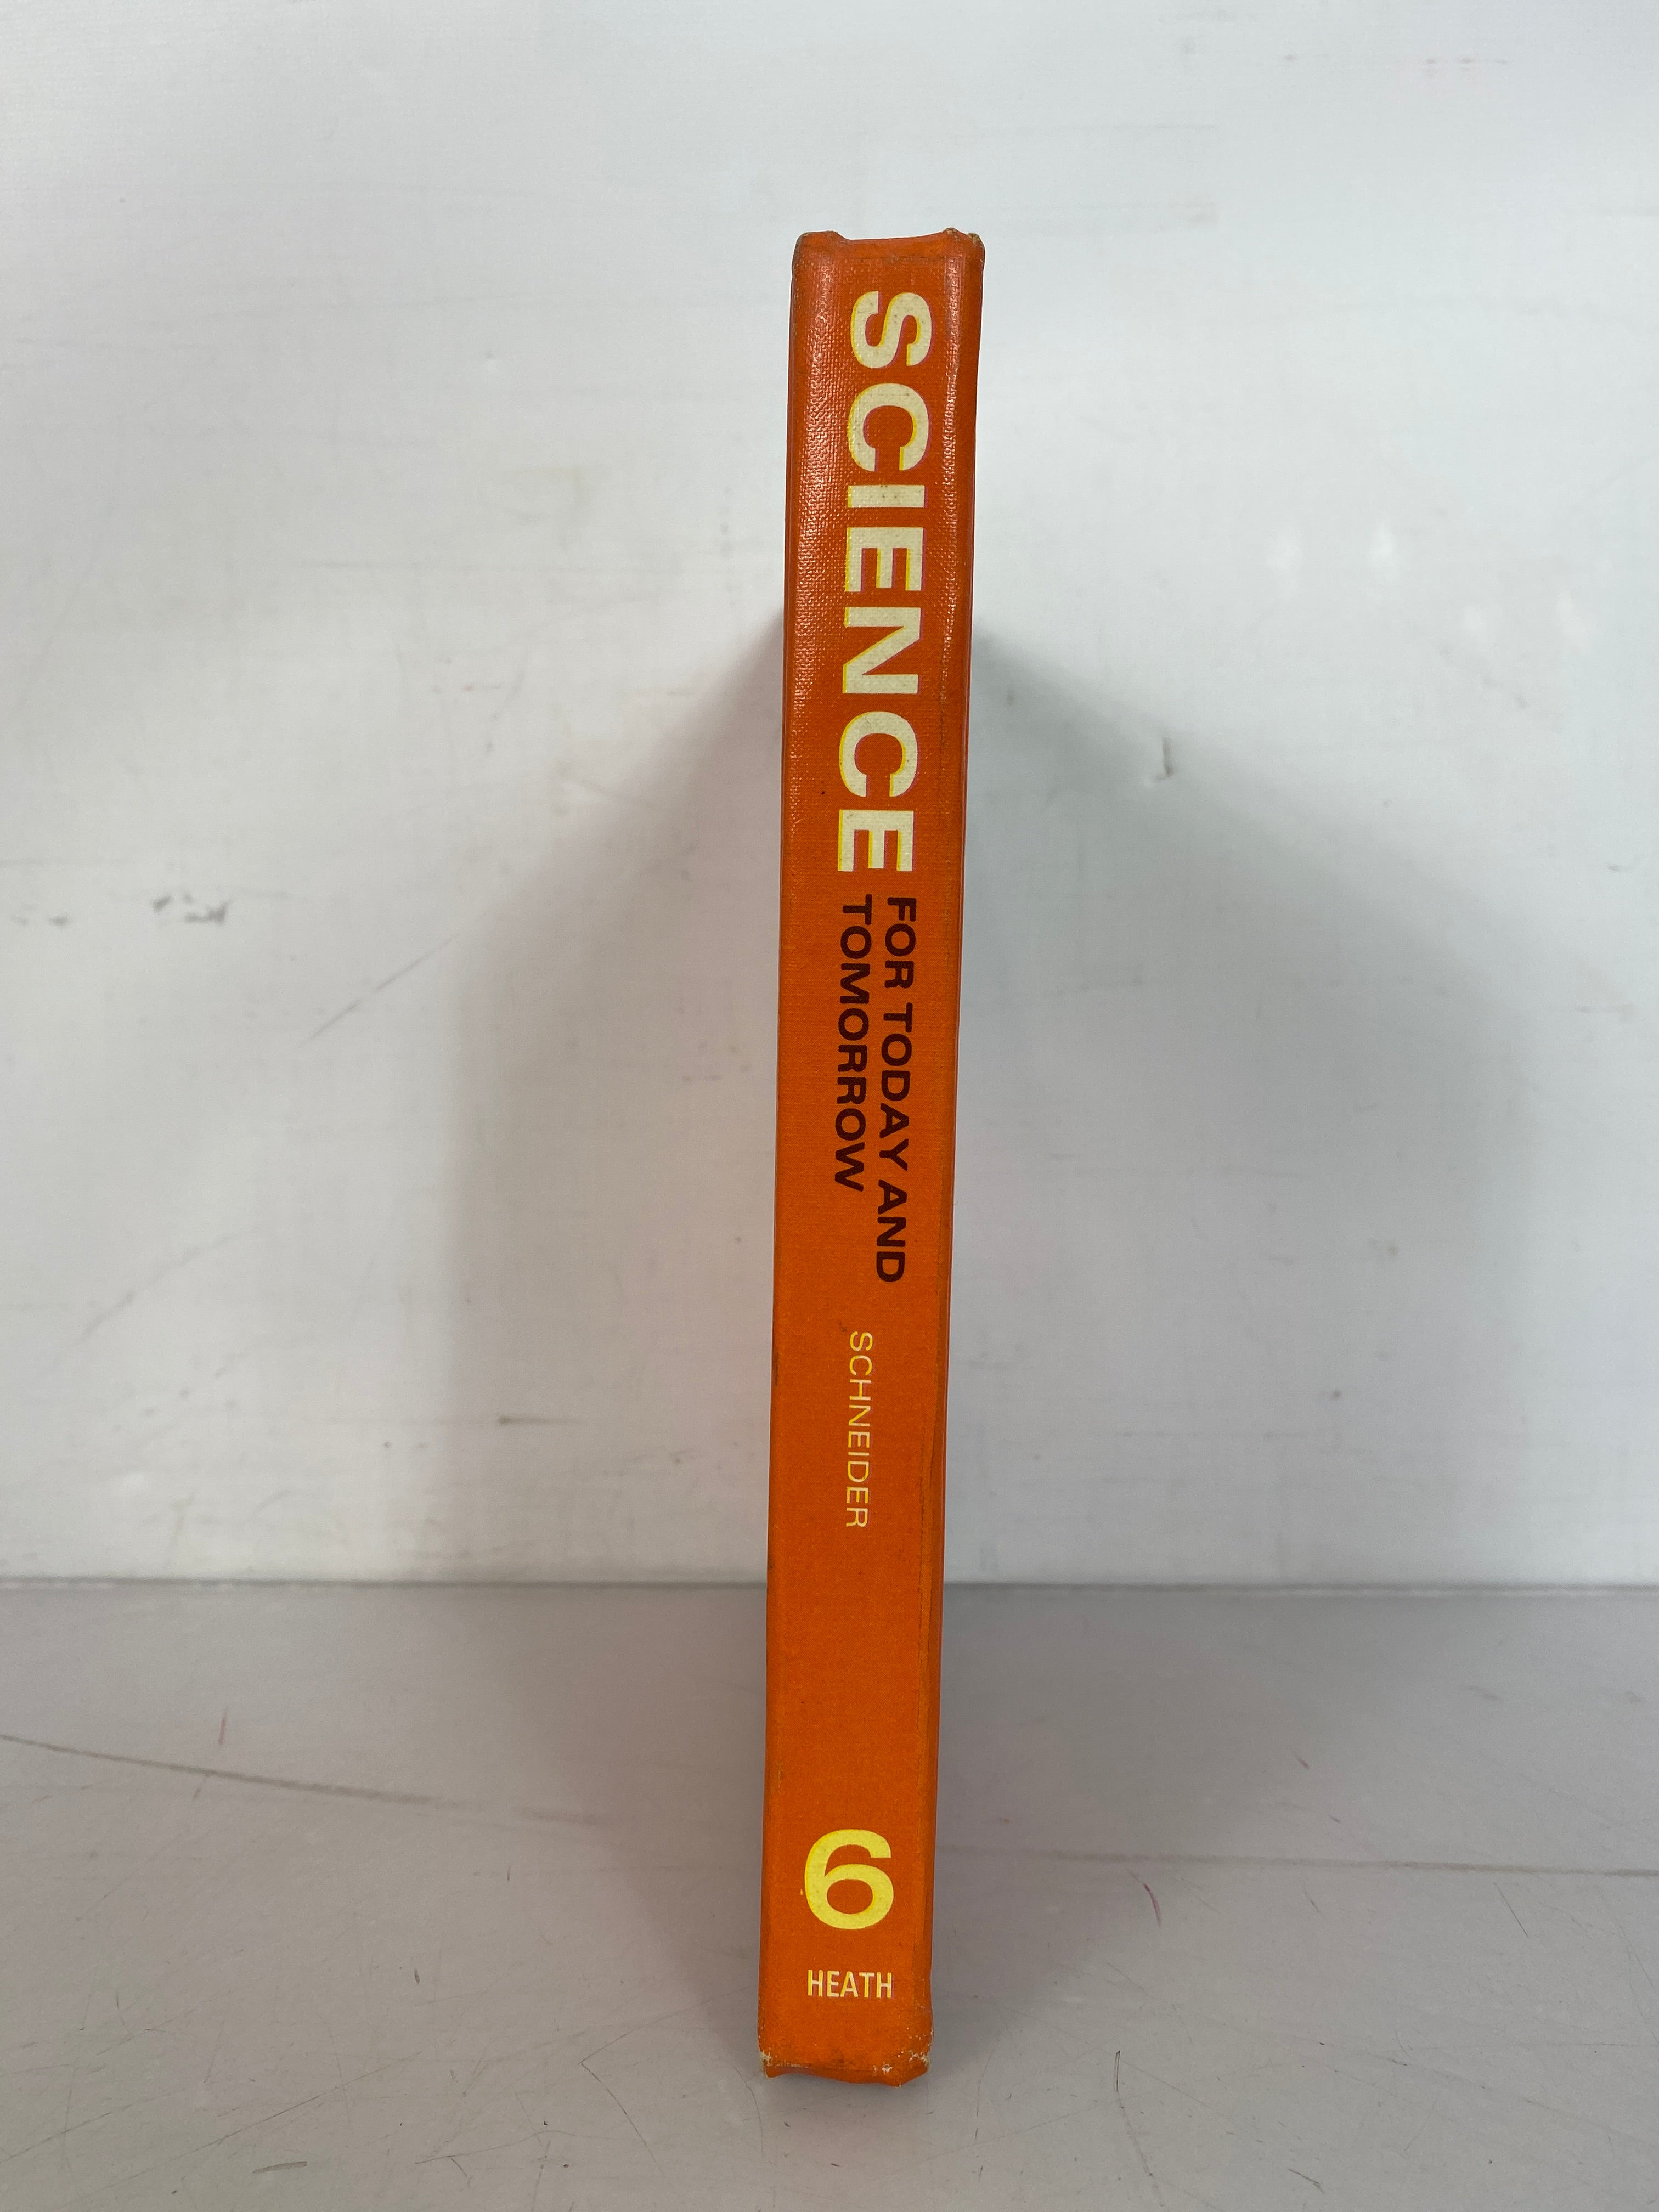 Lot of 2 Science Textbooks Science: A Way to Solve Problems and Science for Today and Tomorrow 1962-1968 HC